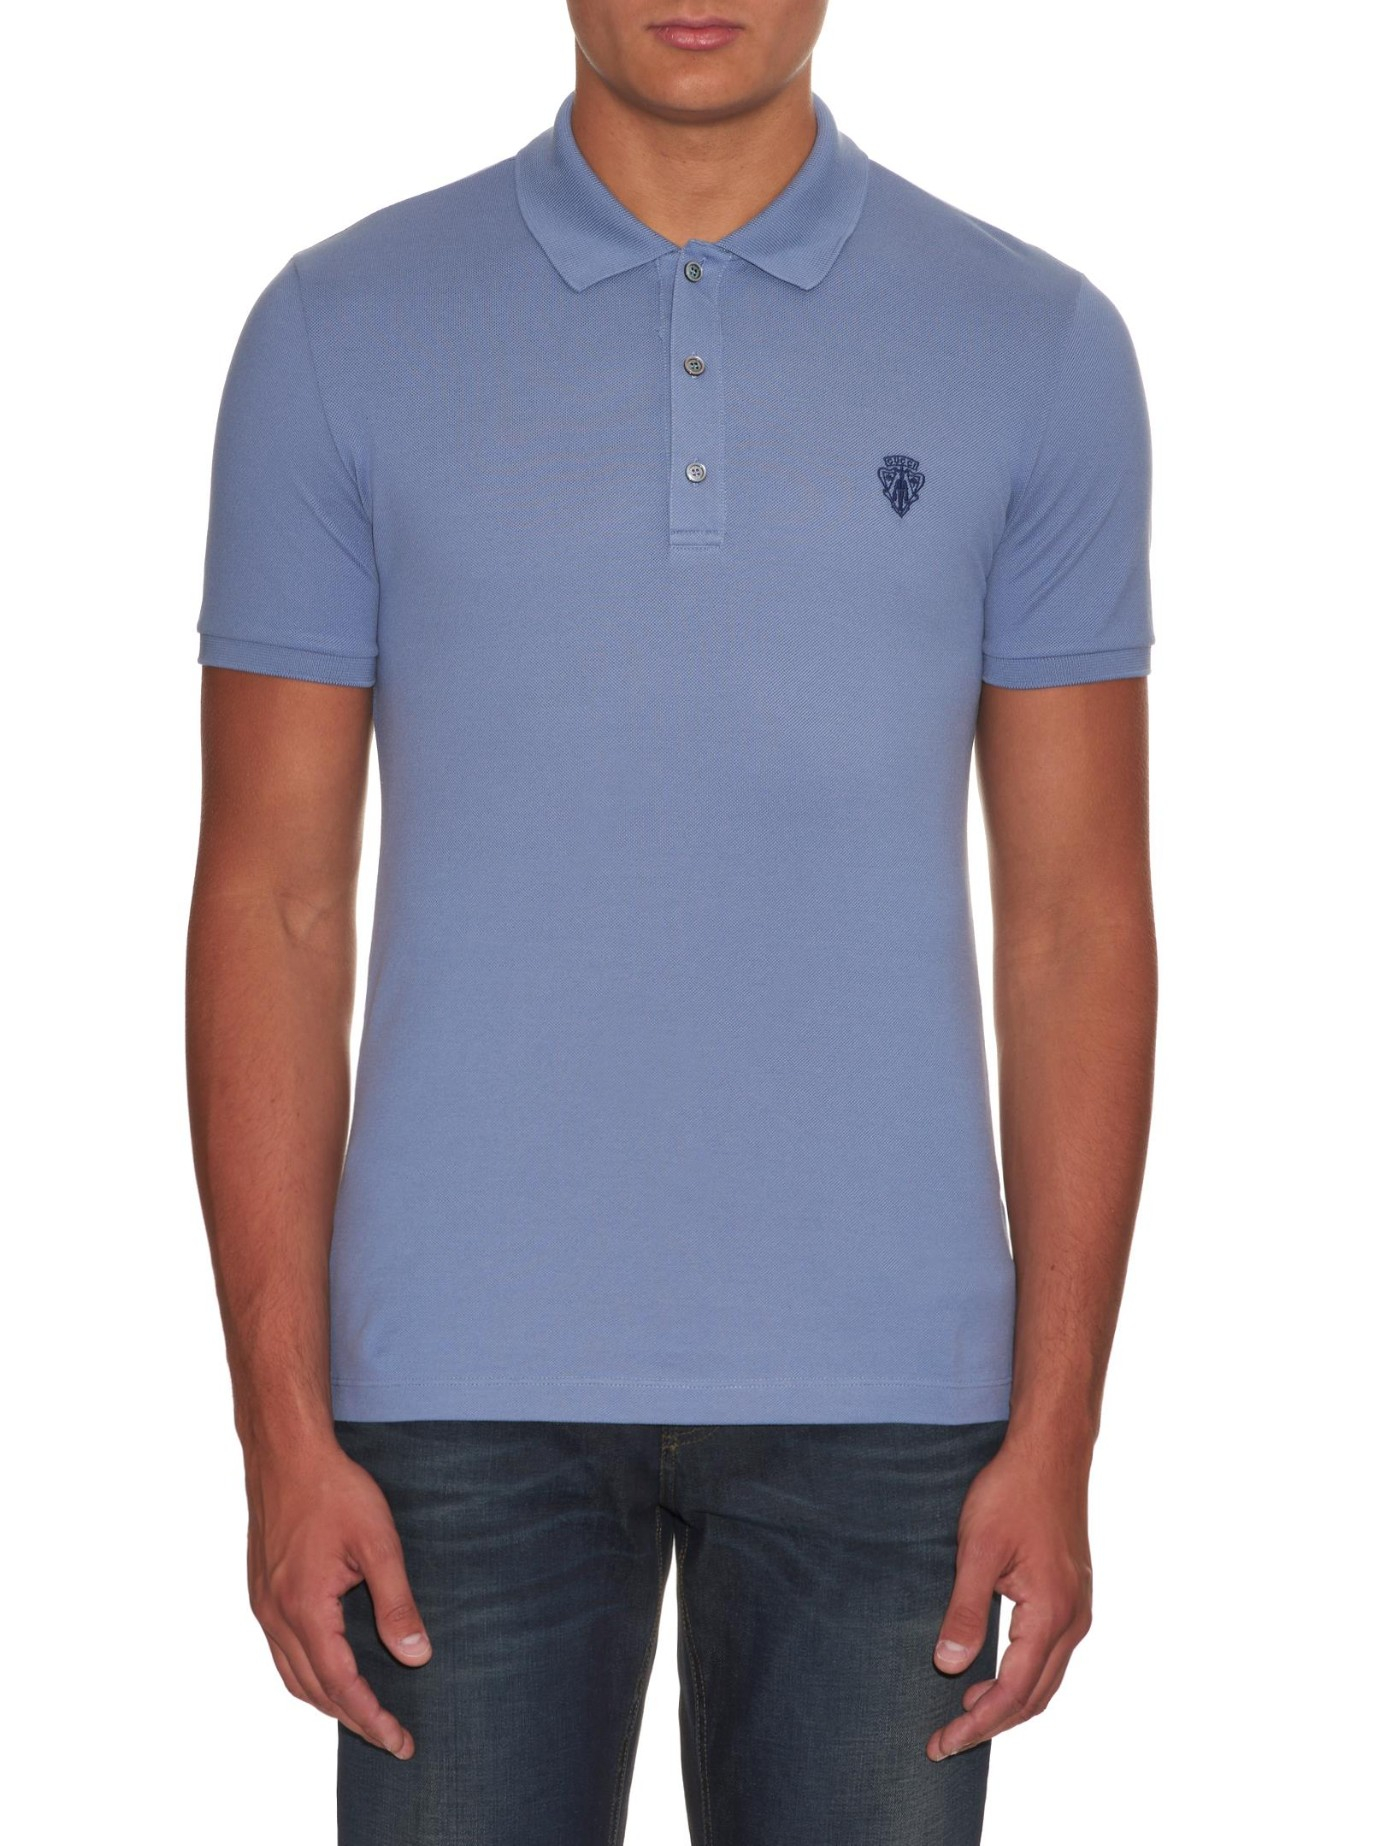 Lyst - Gucci Short-sleeved Piqué Polo Shirt in Blue for Men